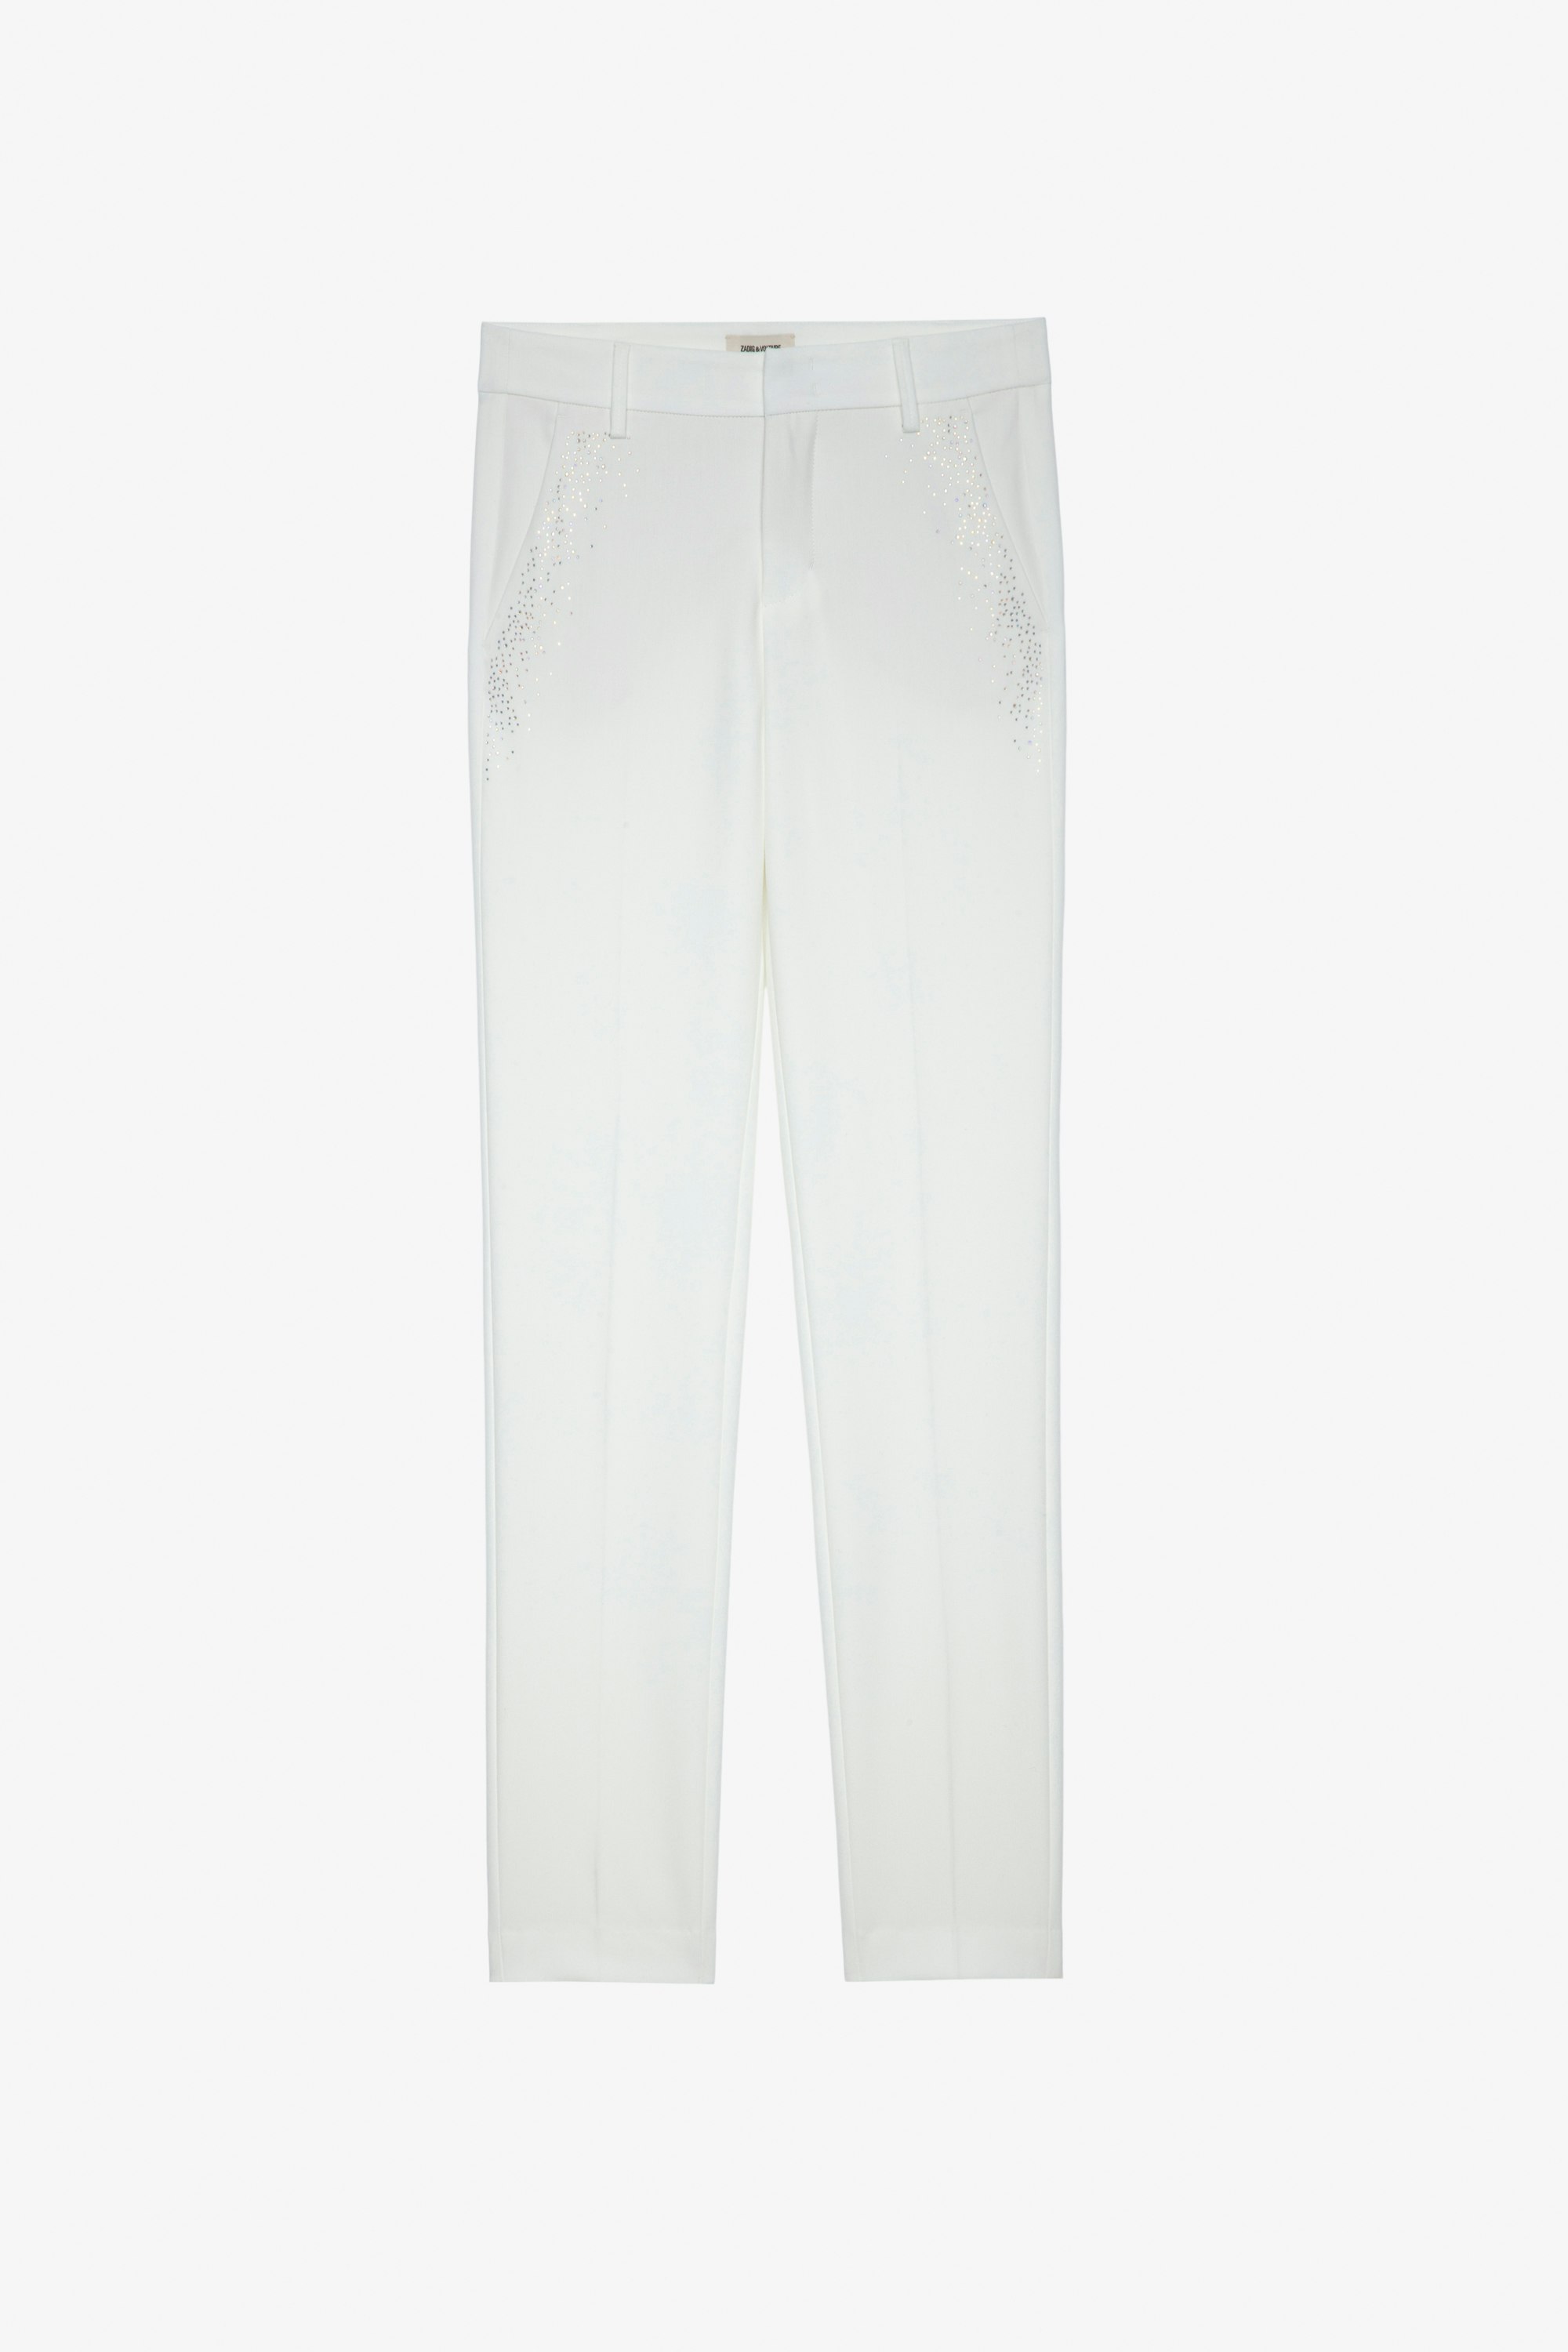 Prune Trousers - Women's off-white tailored trousers with rhinestones